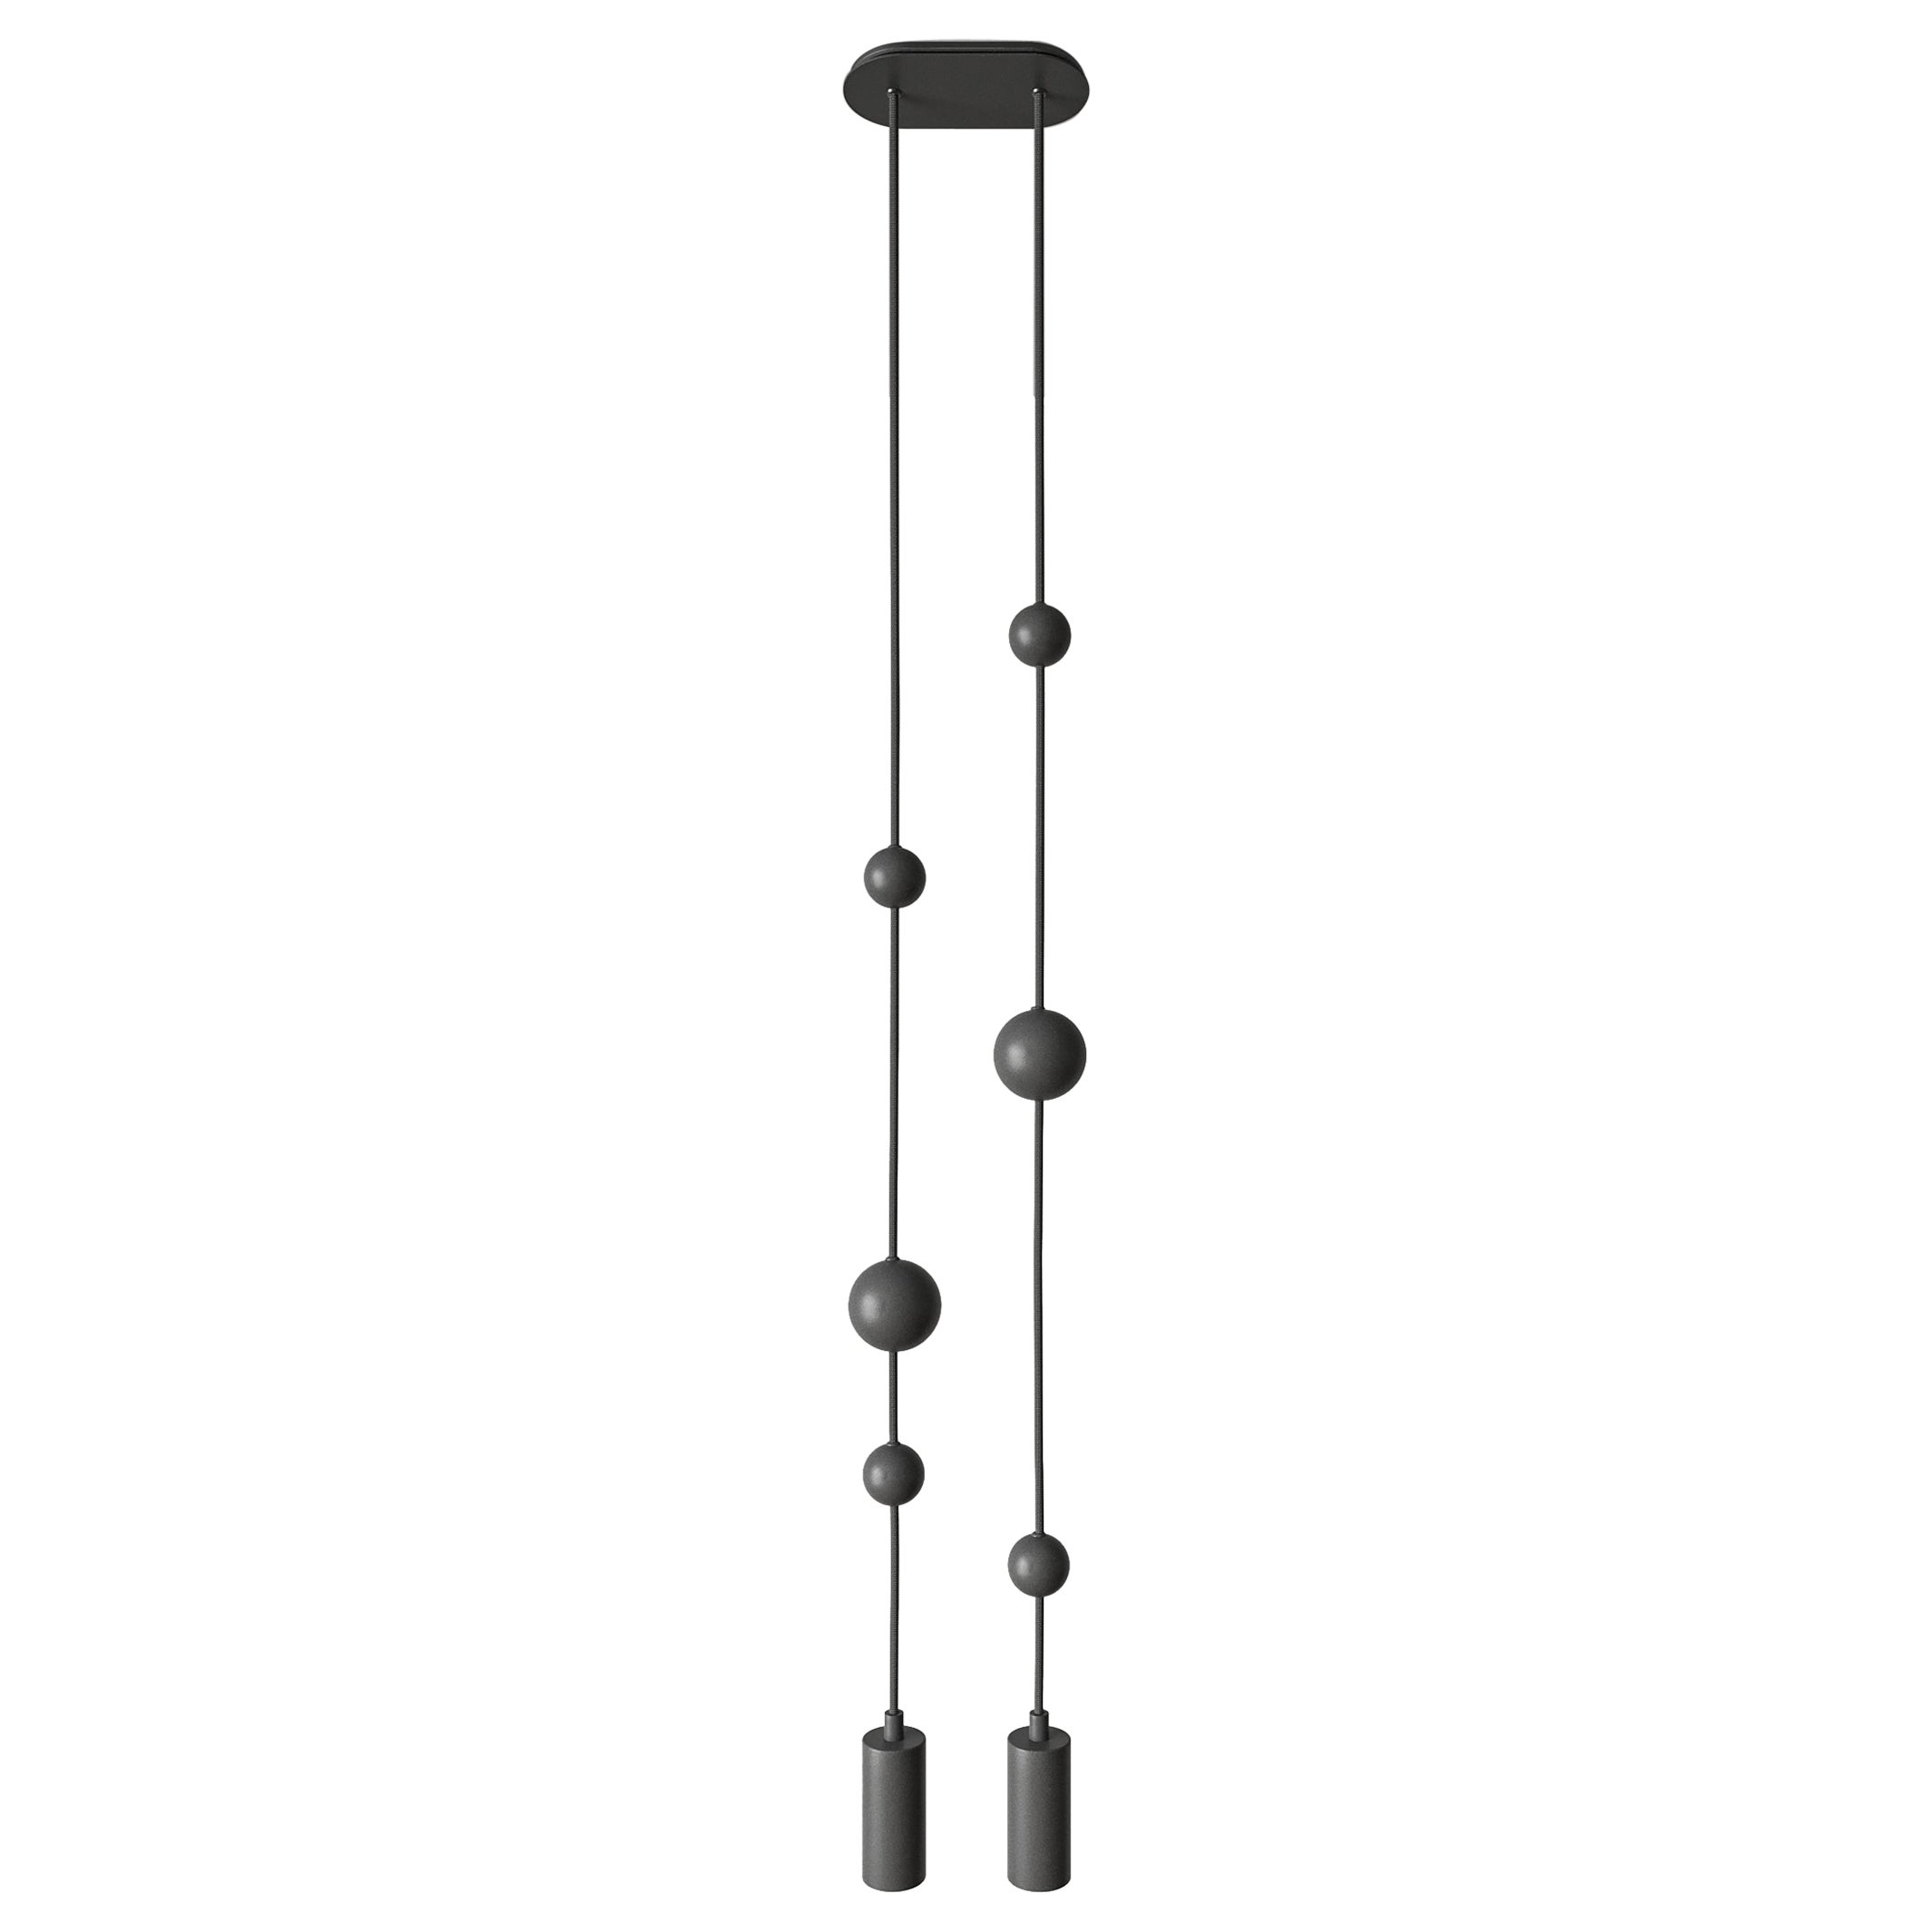 Category: Lighting
Type: Pendant
Material: steel, textile cable
Overall dimensions: H: 2100 mm / W: 160 mm
Light source: 2 * E14, 110-220V
Available in different color according to RAL Classic.

